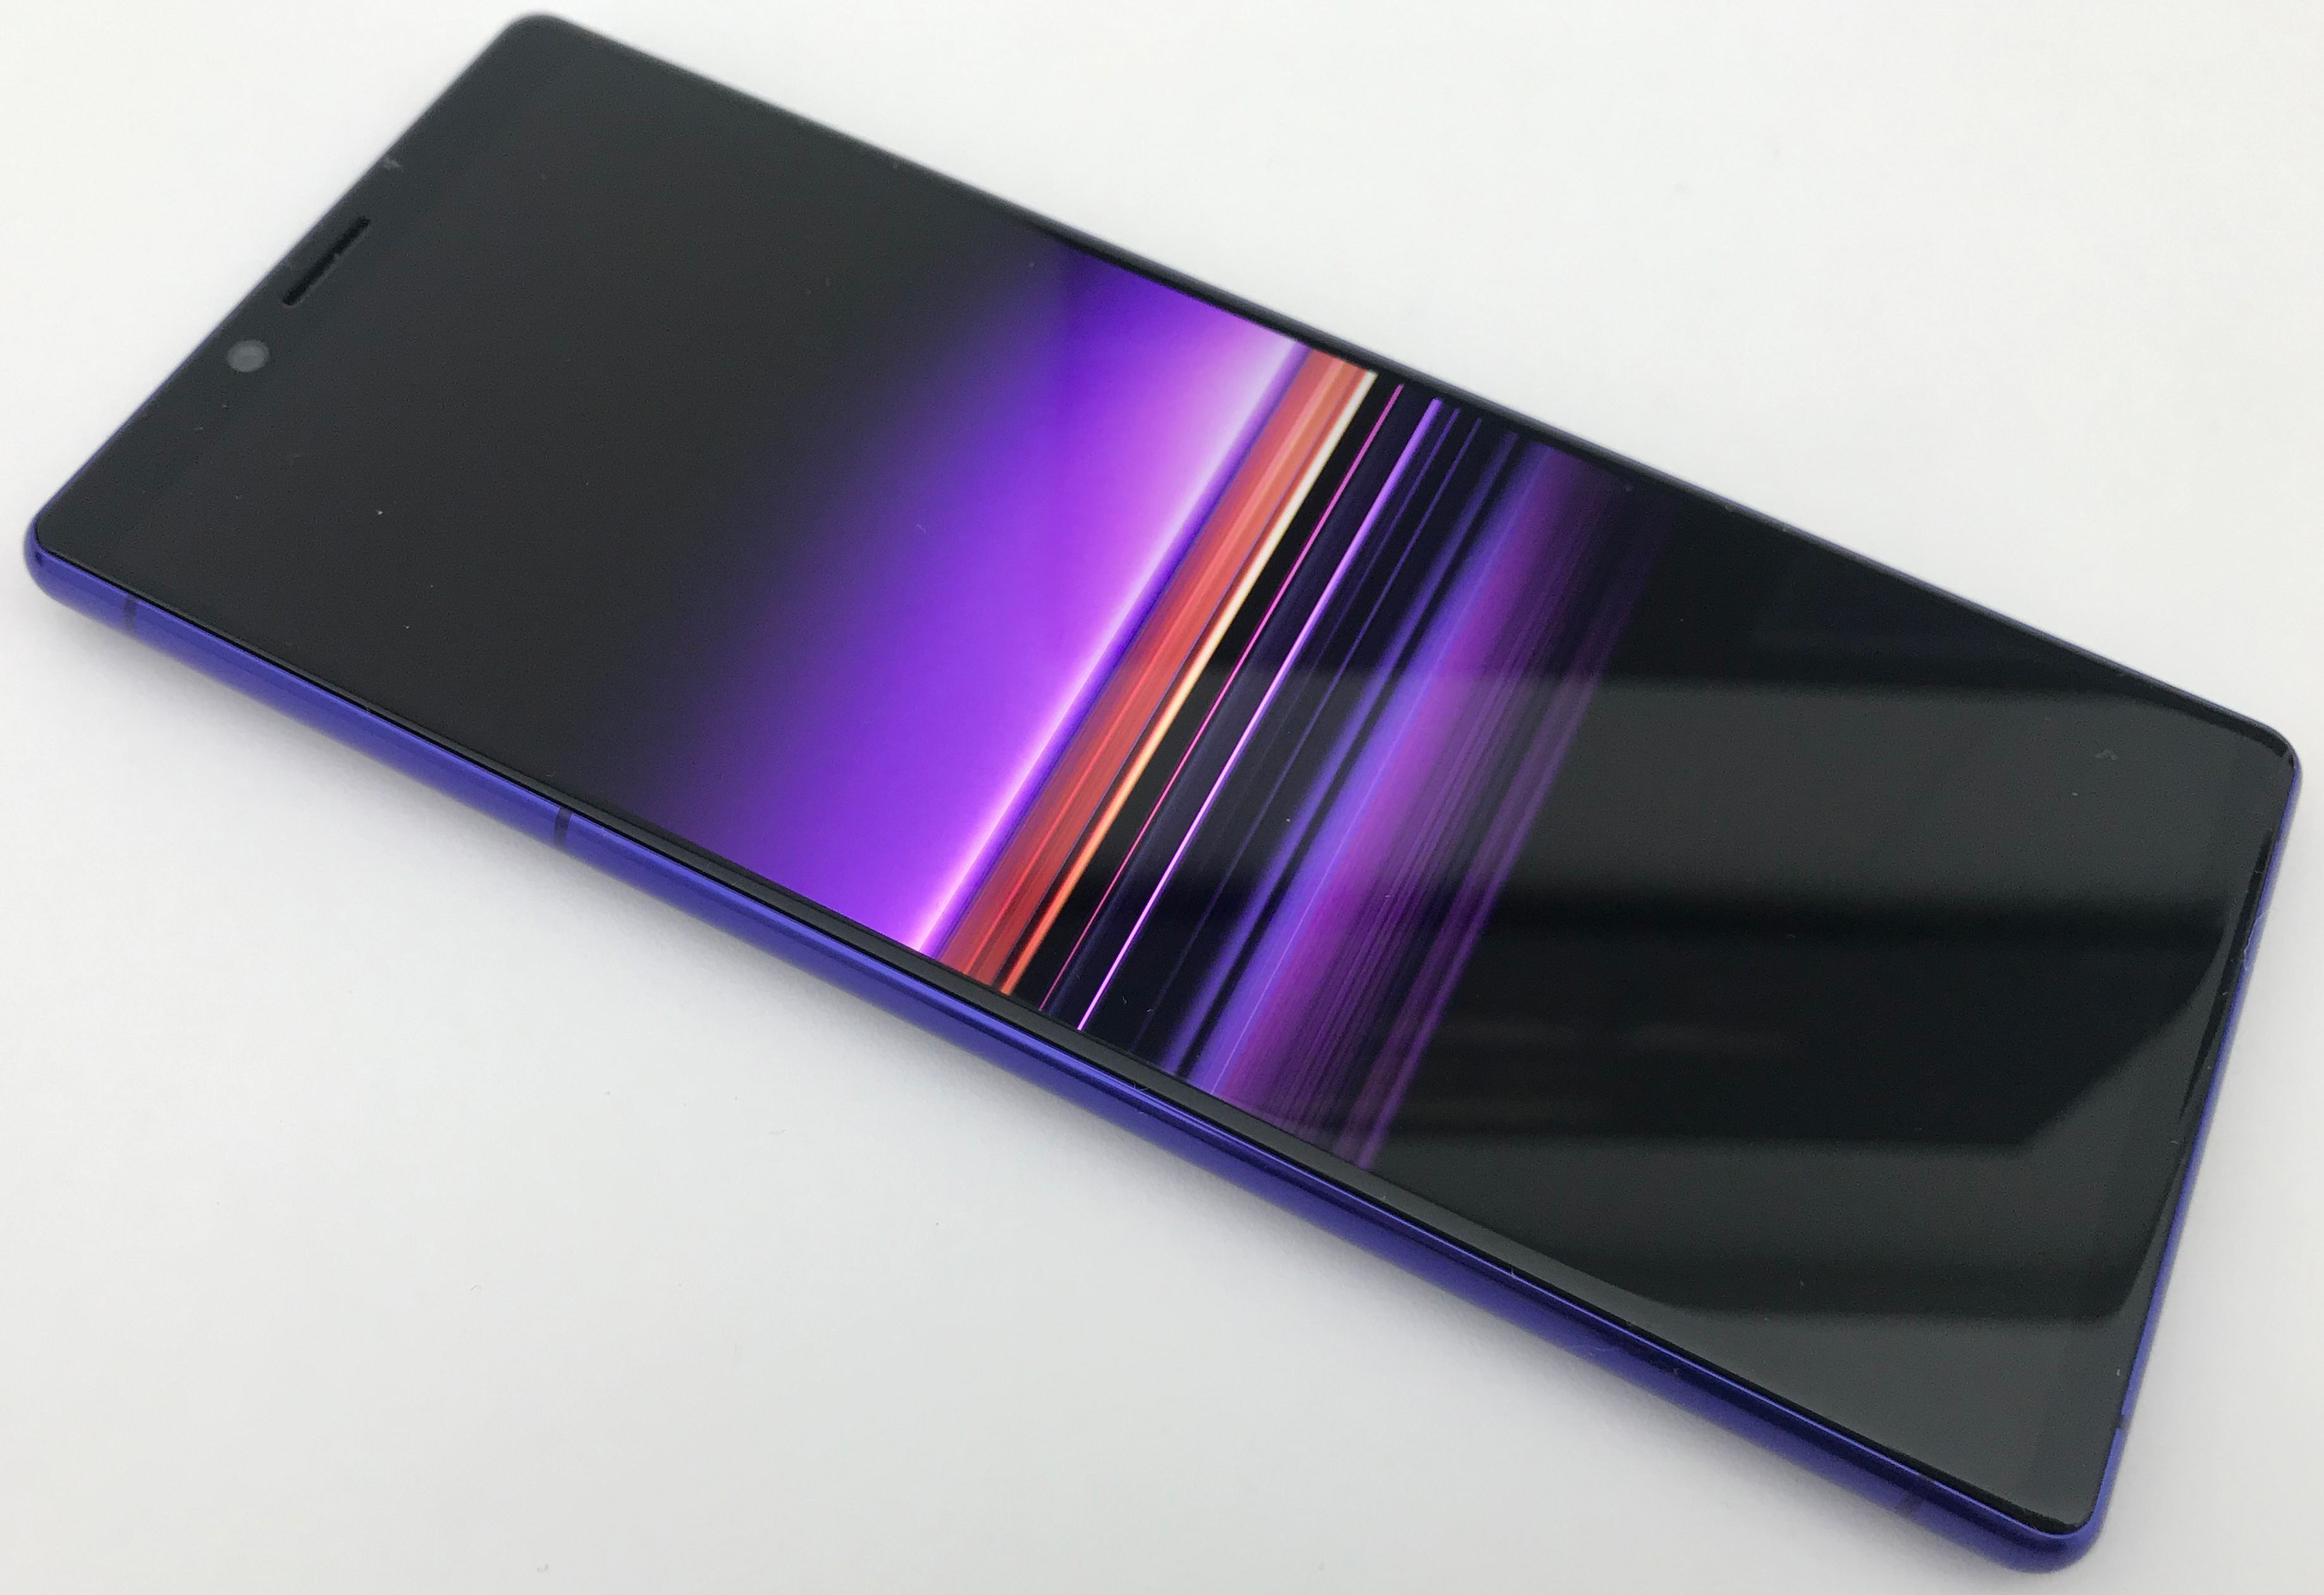 Sony Xperia 1 The Long 21 9 Smartphone Available For Pre Order